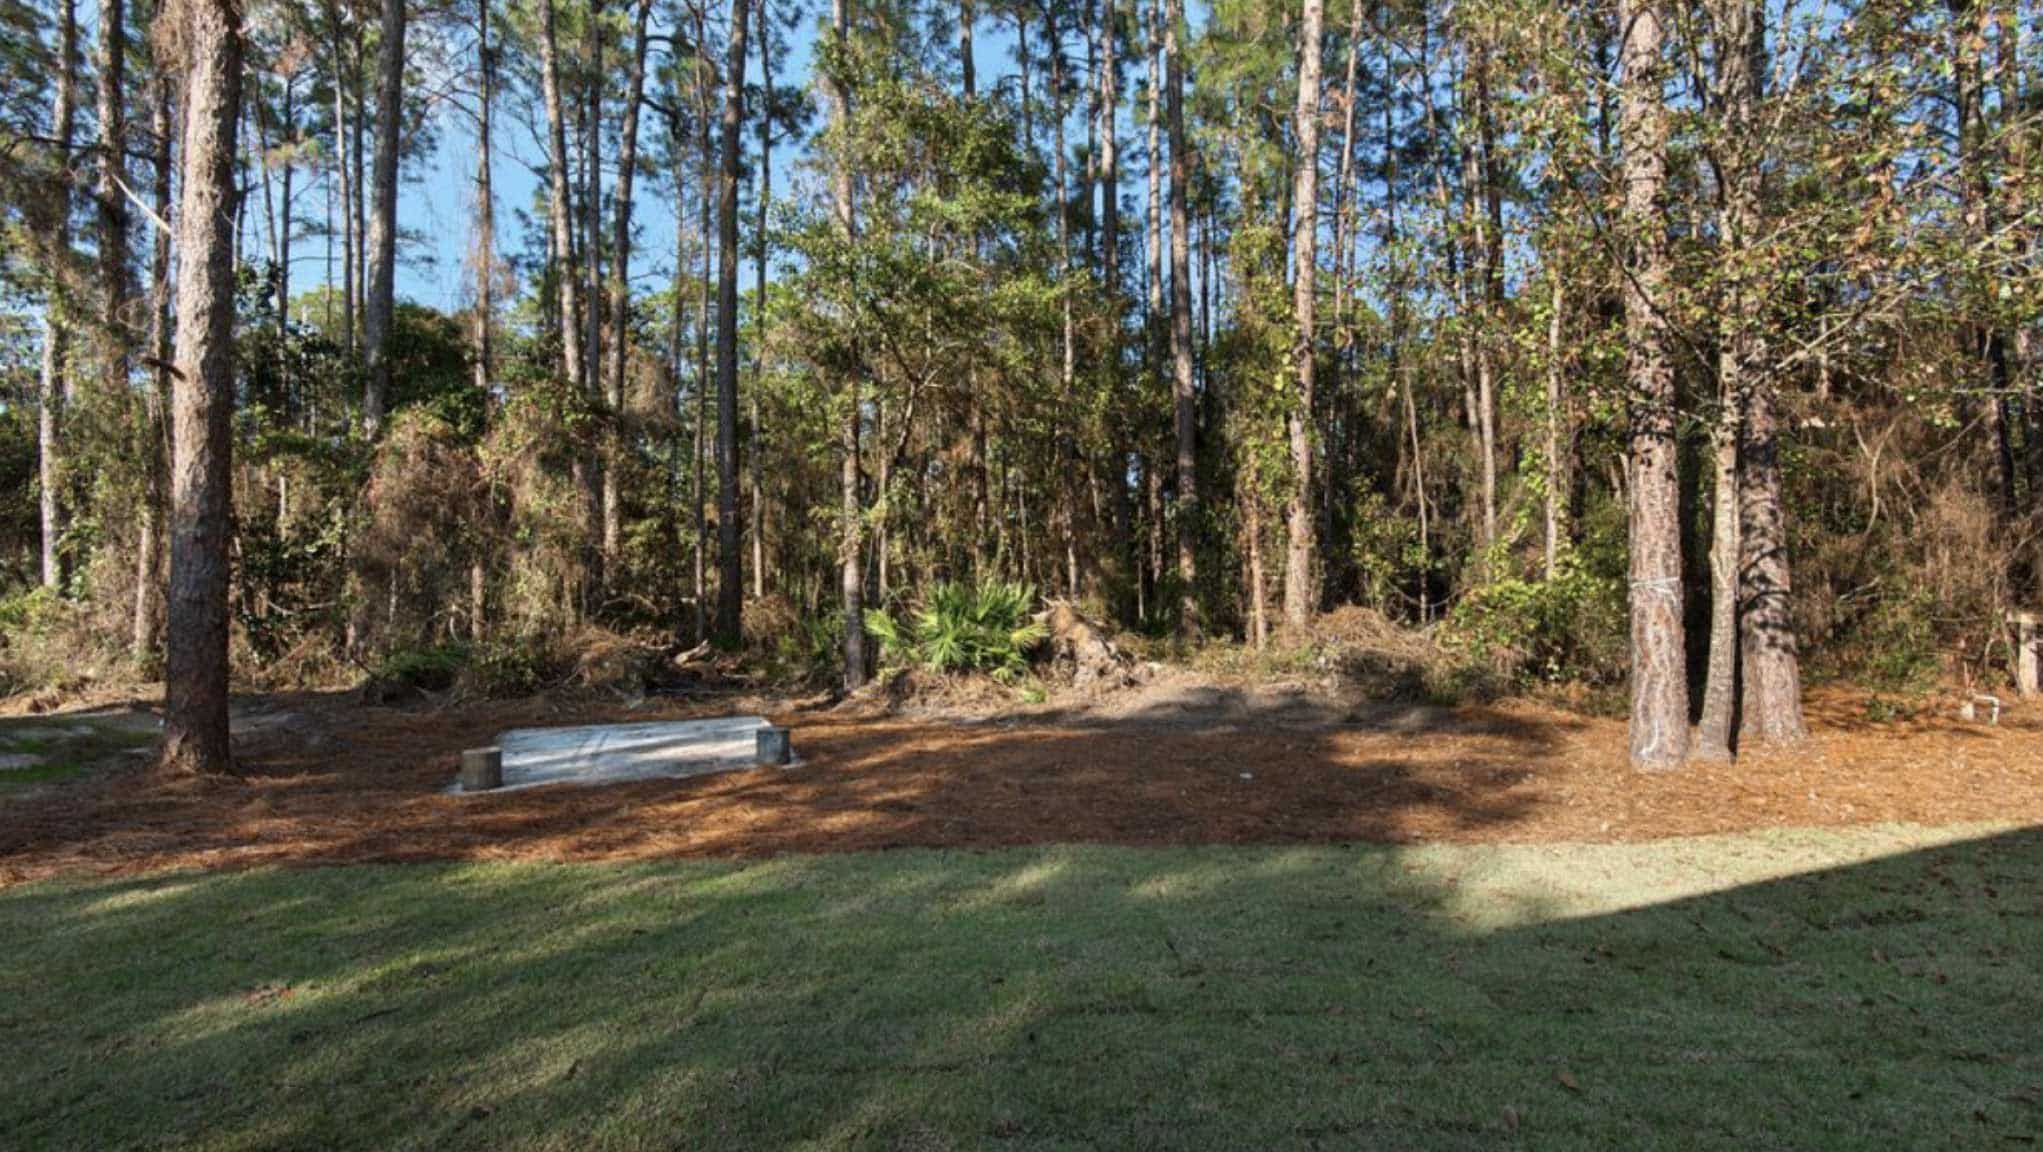 Before photo of backyard with lawn and forested area in background